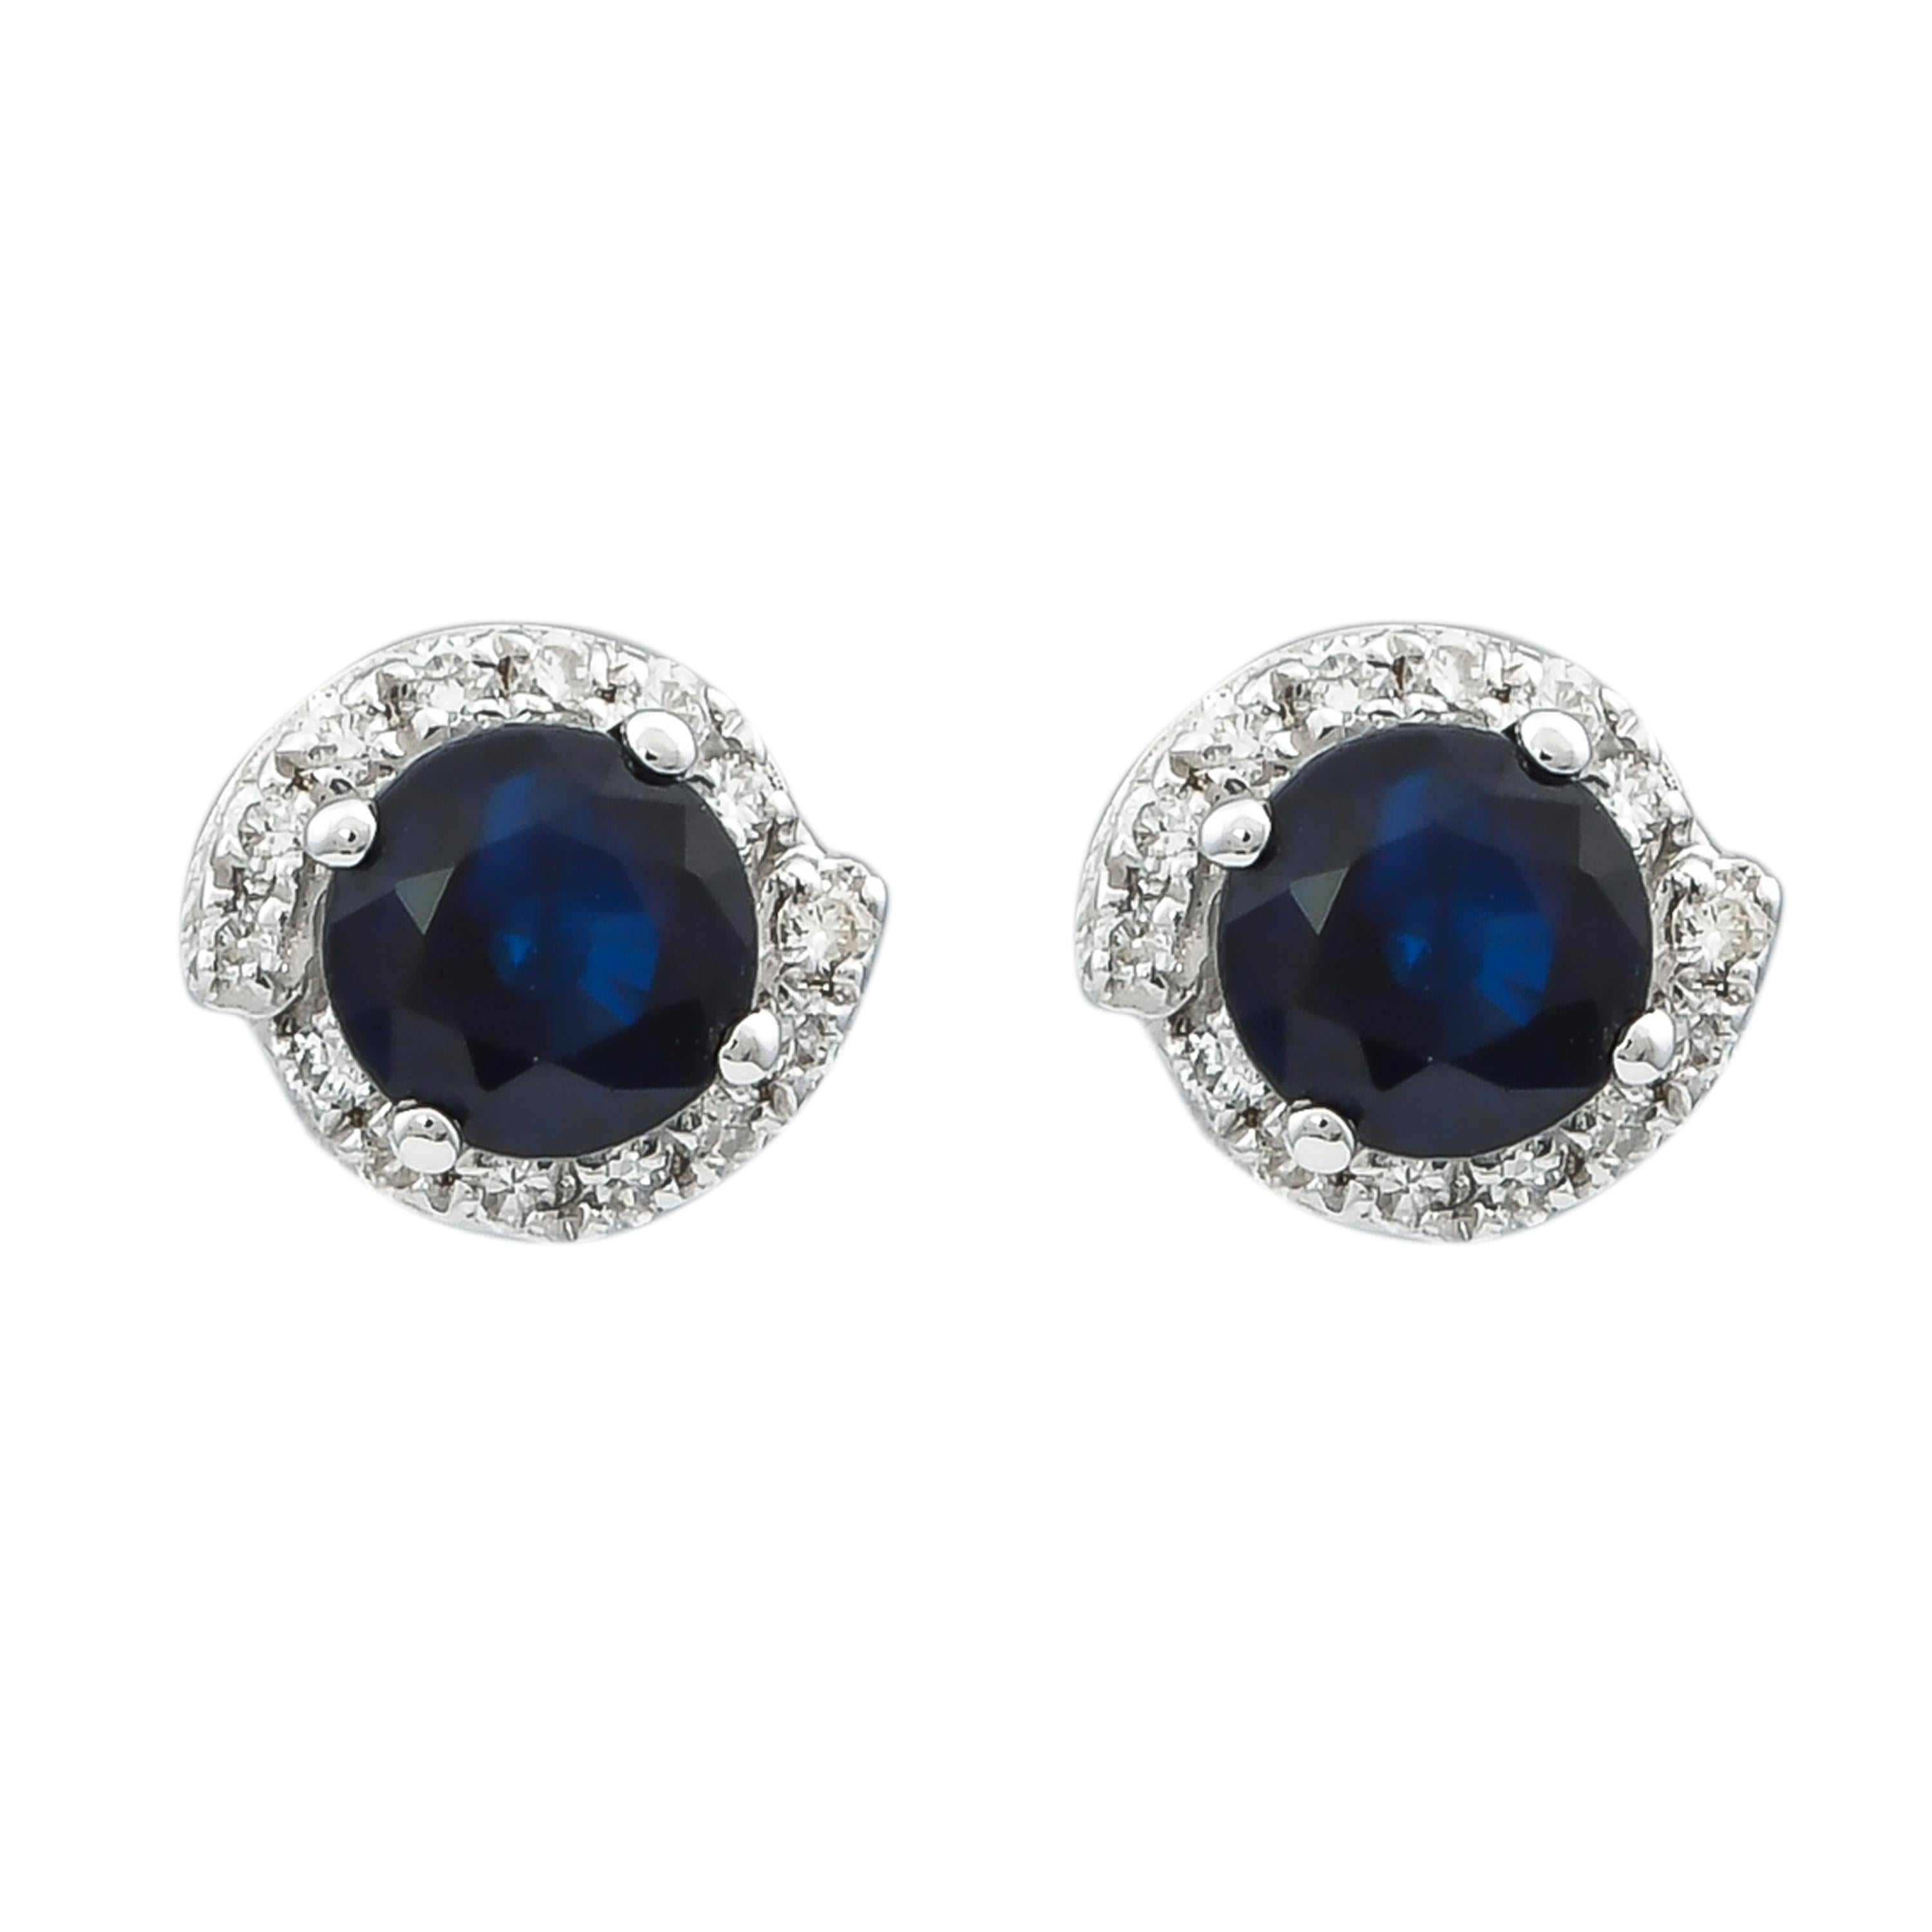 Contemporary 1.0 Carat Blue Sapphire and Diamond Earring in 18 Karat White Gold For Sale